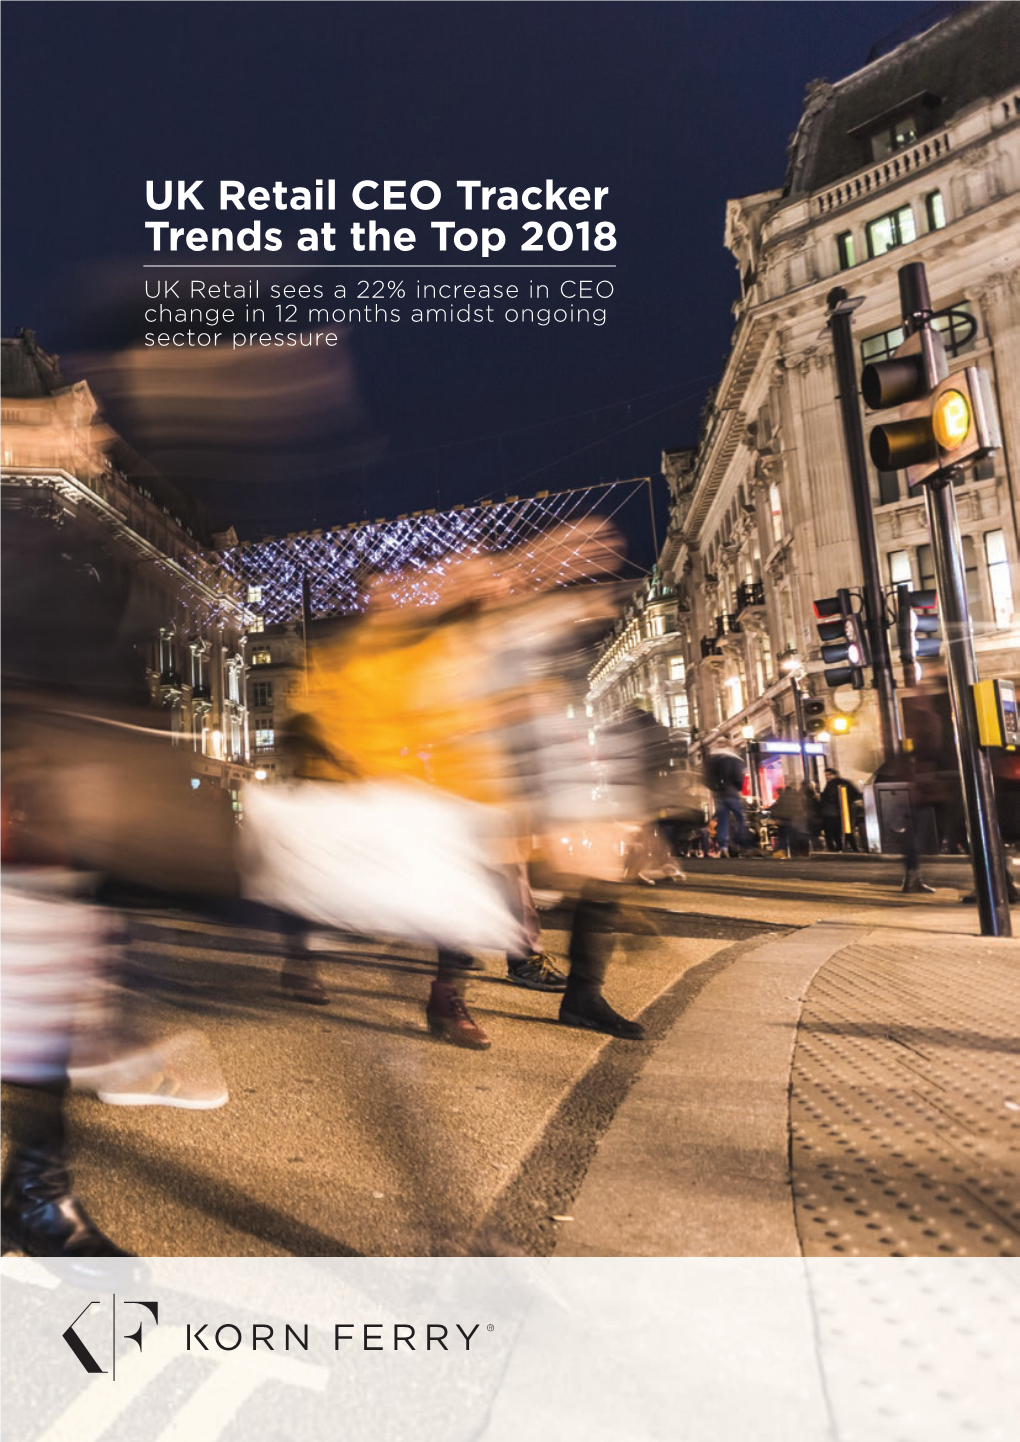 UK Retail CEO Tracker Trends at the Top 2018 UK Retail Sees a 22% Increase in CEO Change in 12 Months Amidst Ongoing Sector Pressure | CEO TRACKER 2018 |